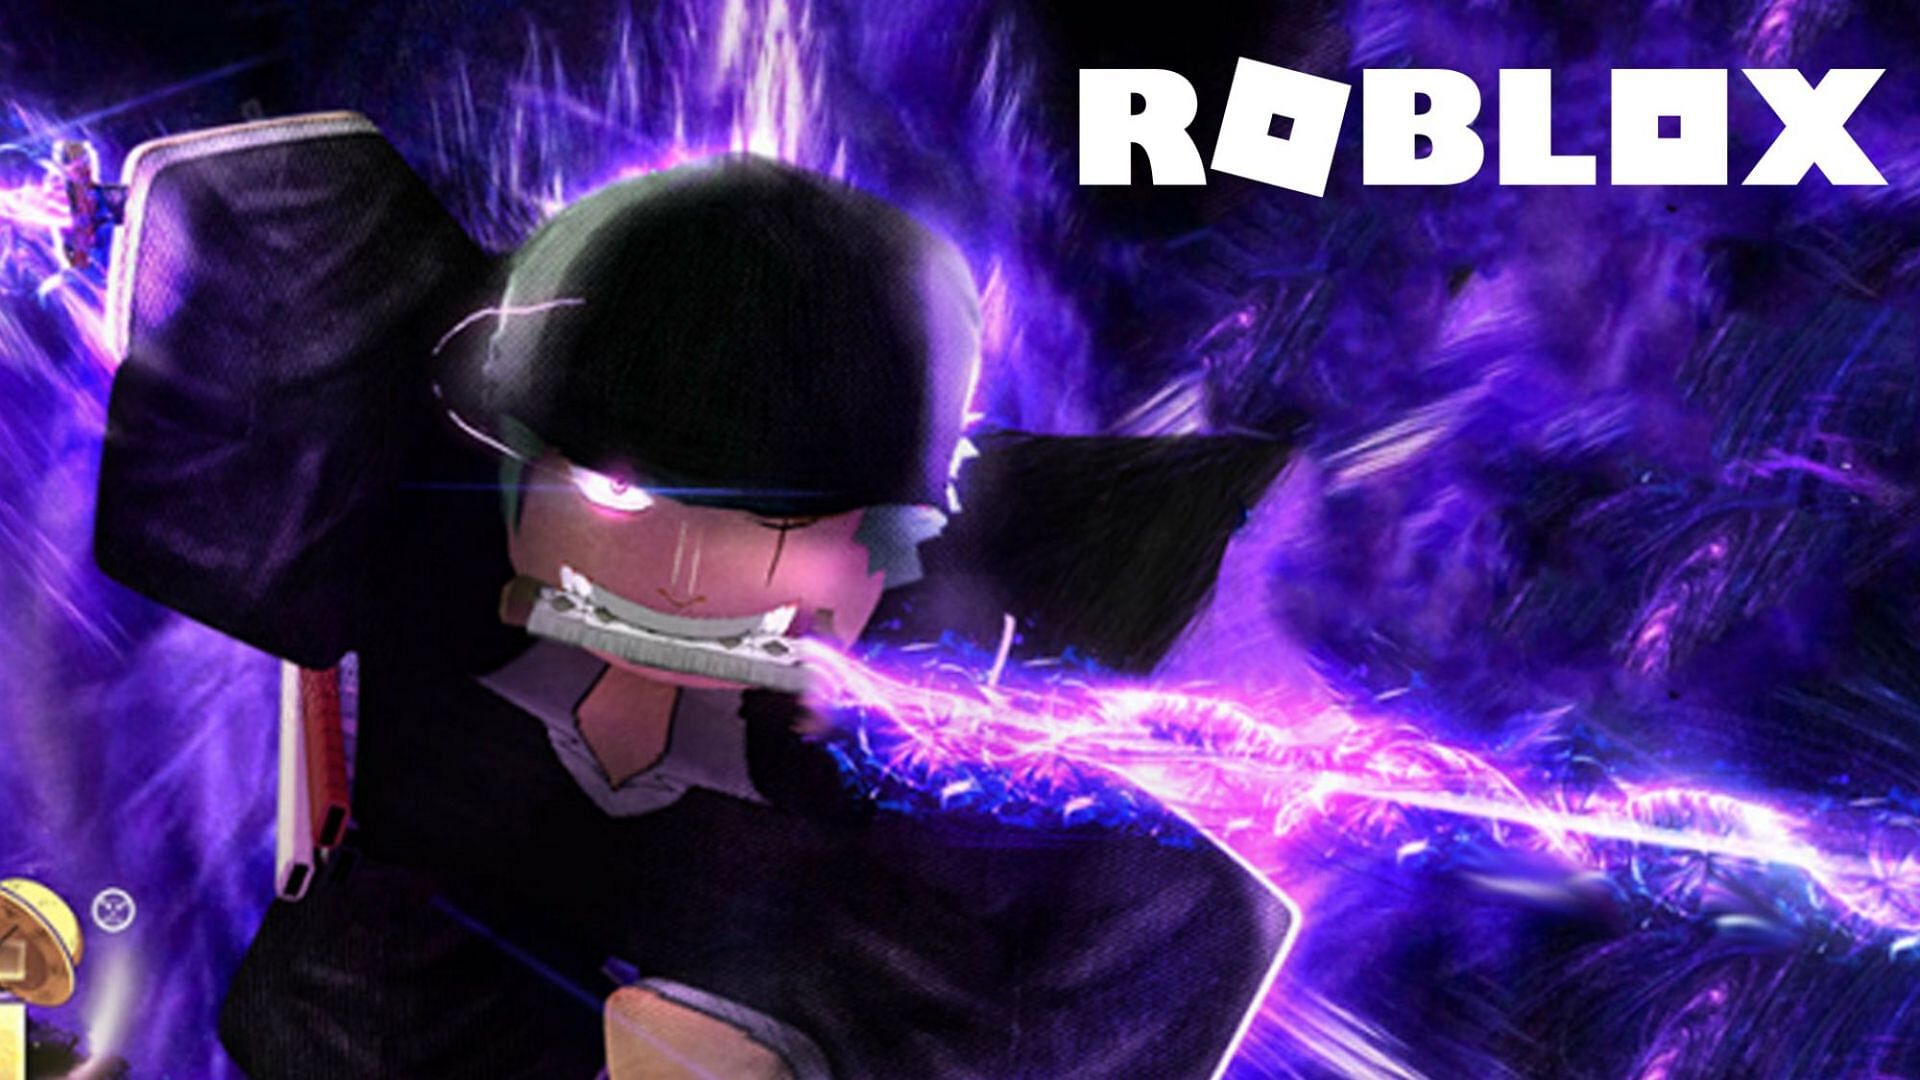 5 best Roblox games for fans of One Piece